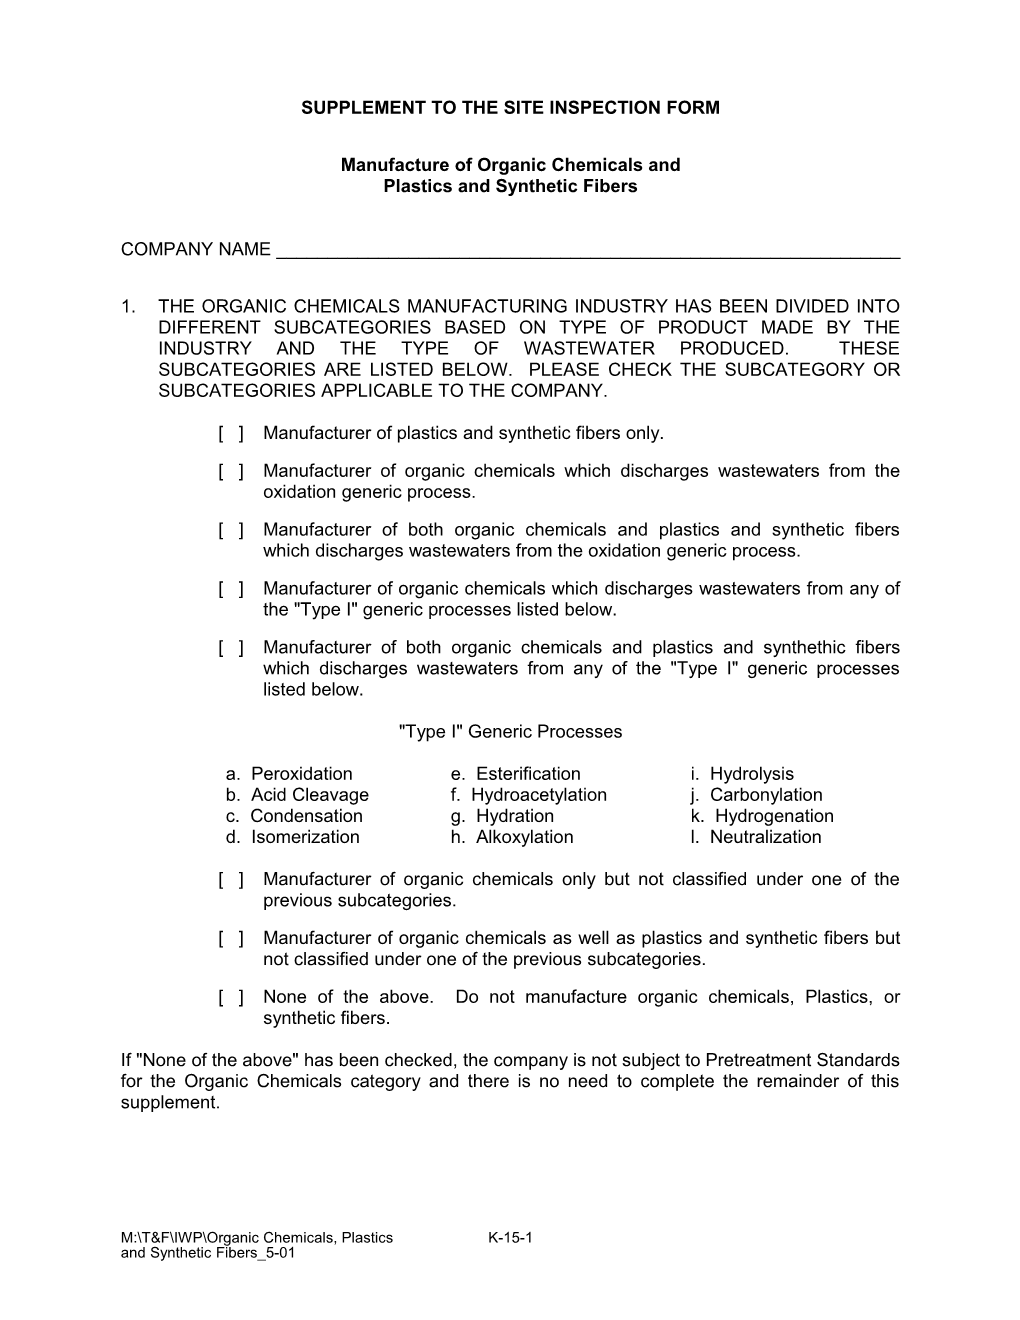 Supplement to the Site Inspection Form